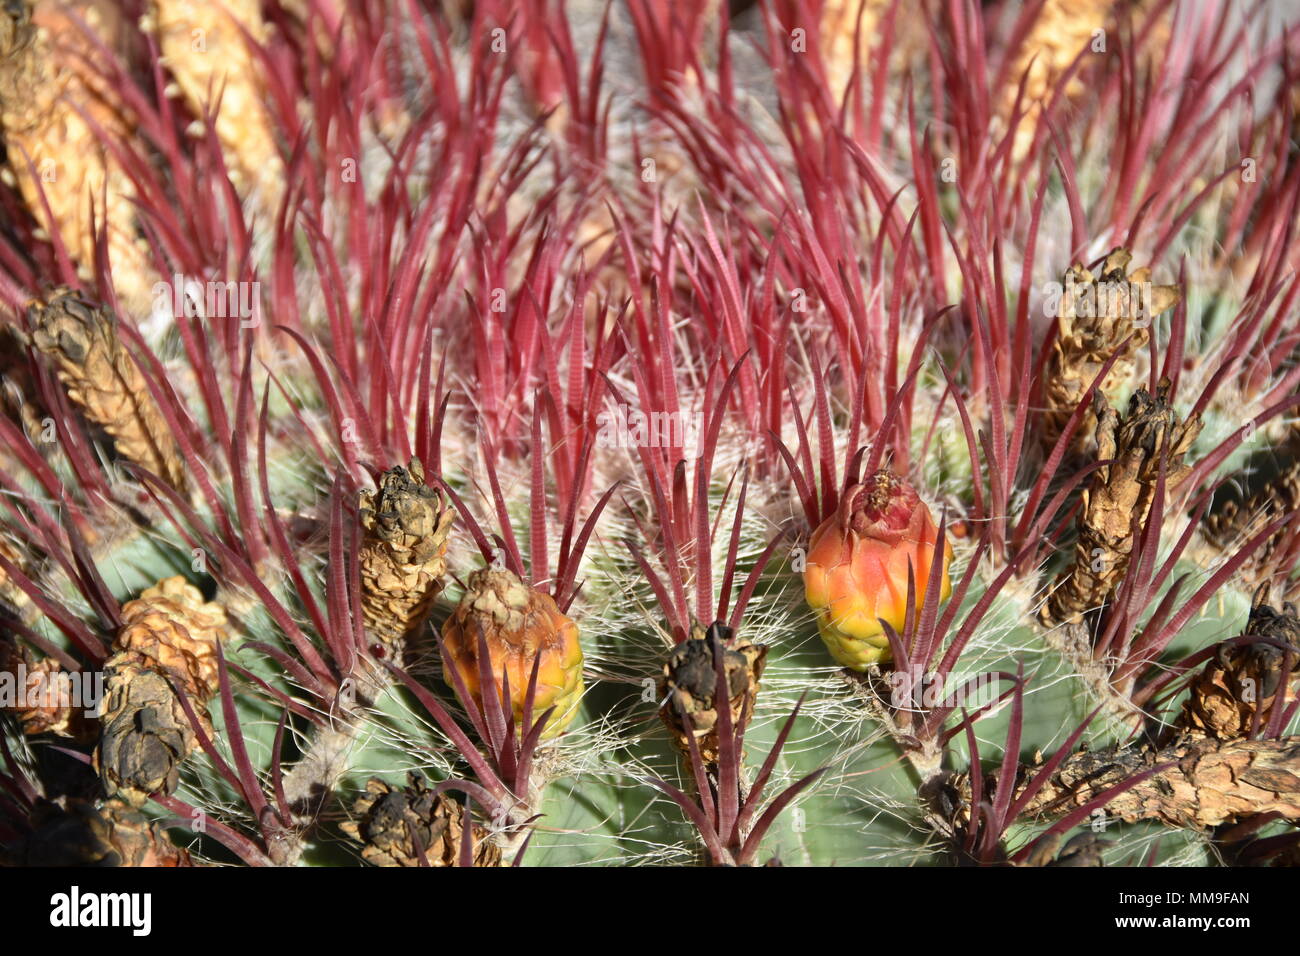 Closeup on the thorns of a fire barrel cactus Stock Photo